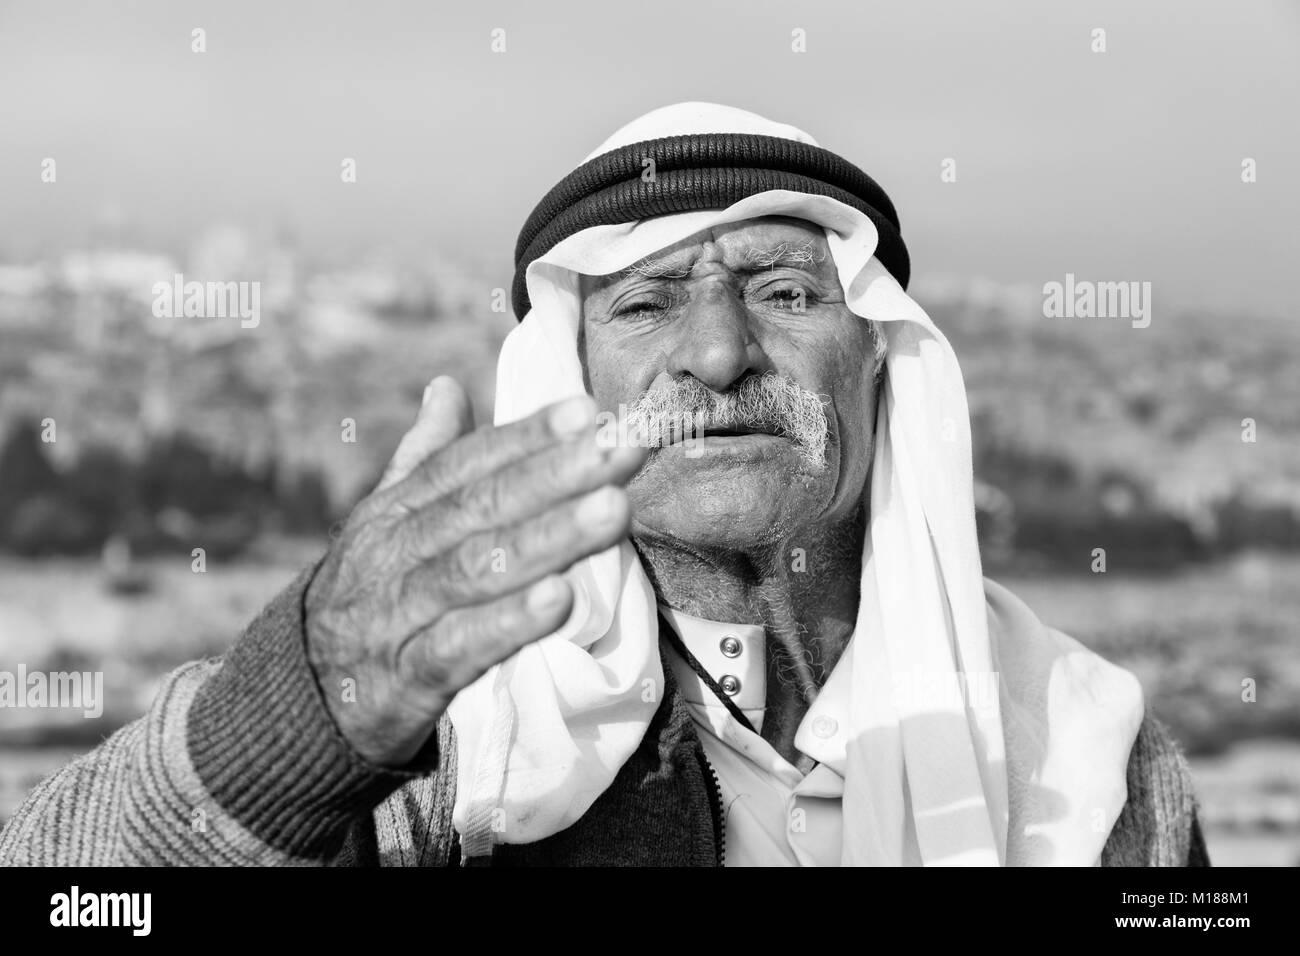 JERUSALEM, ISRAEL - December 2016: Arab man wave to peace against the Temple Mount and lift his arm Stock Photo